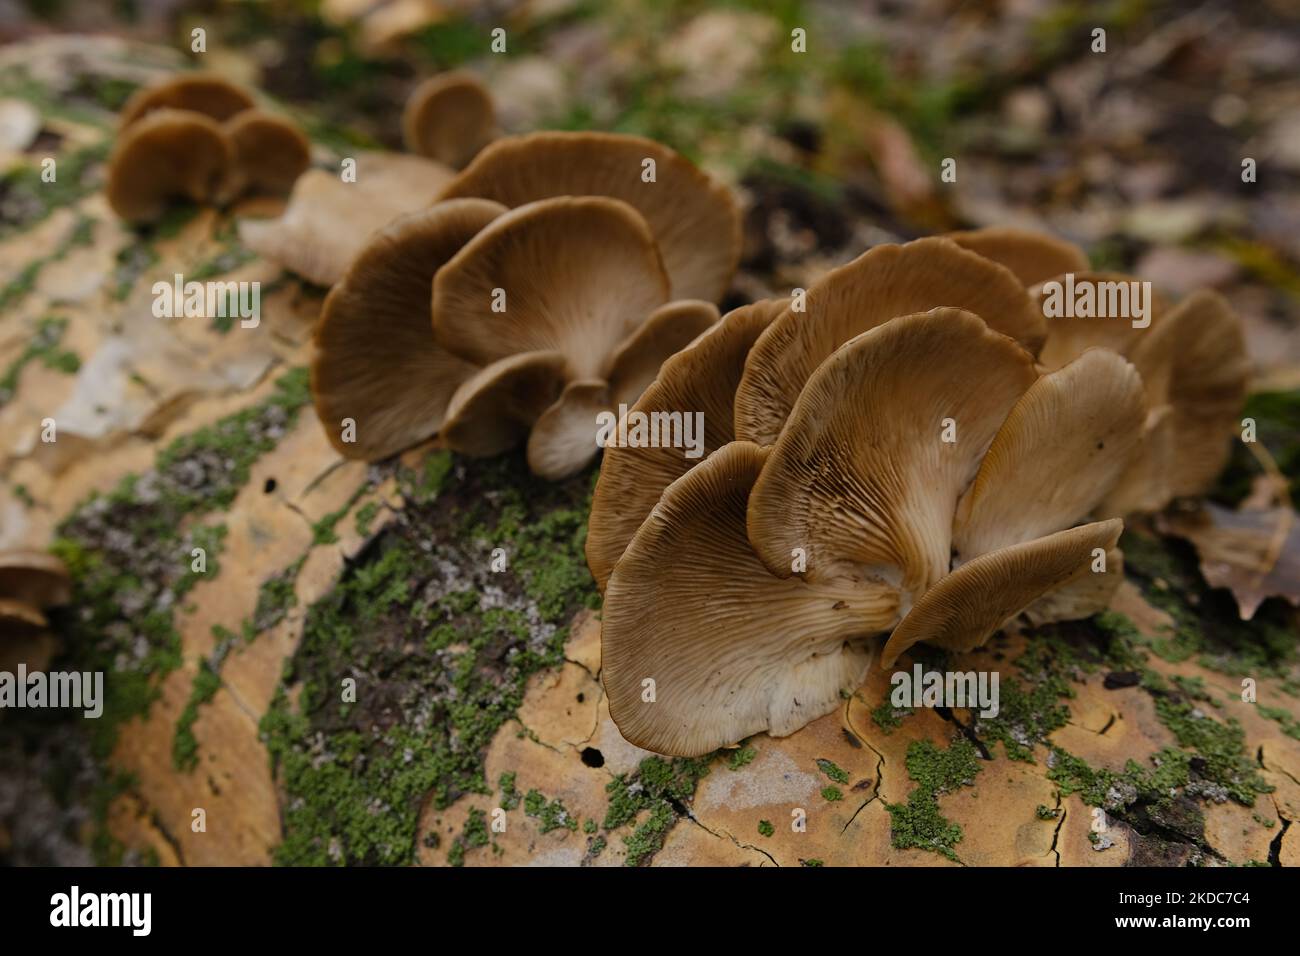 Oyster mushroom straw Cut Out Stock Images & Pictures - Alamy